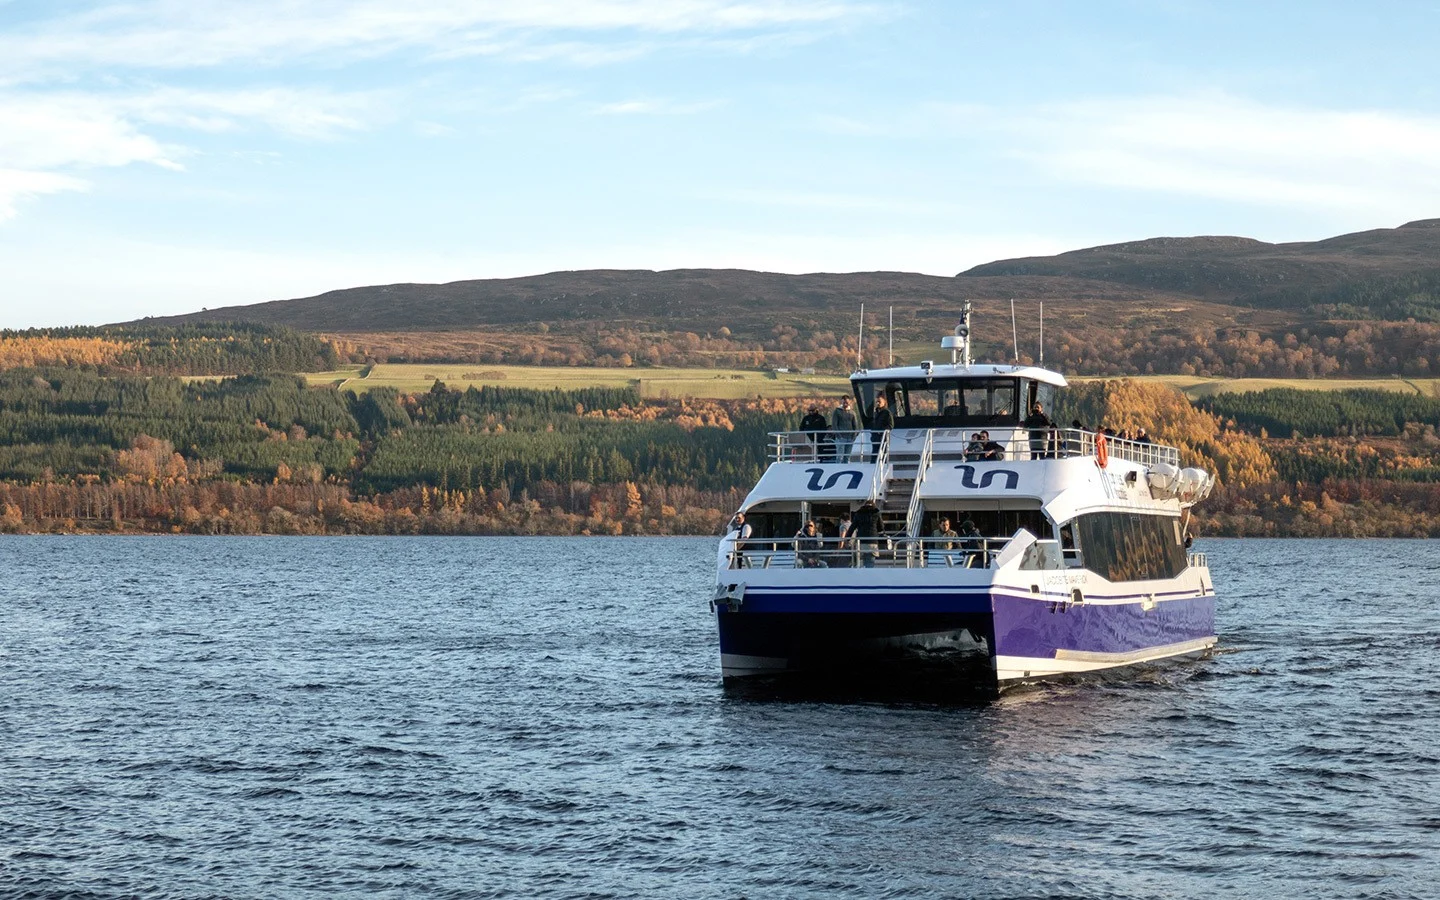 A boat trip with Jacobite cruises on Loch Ness